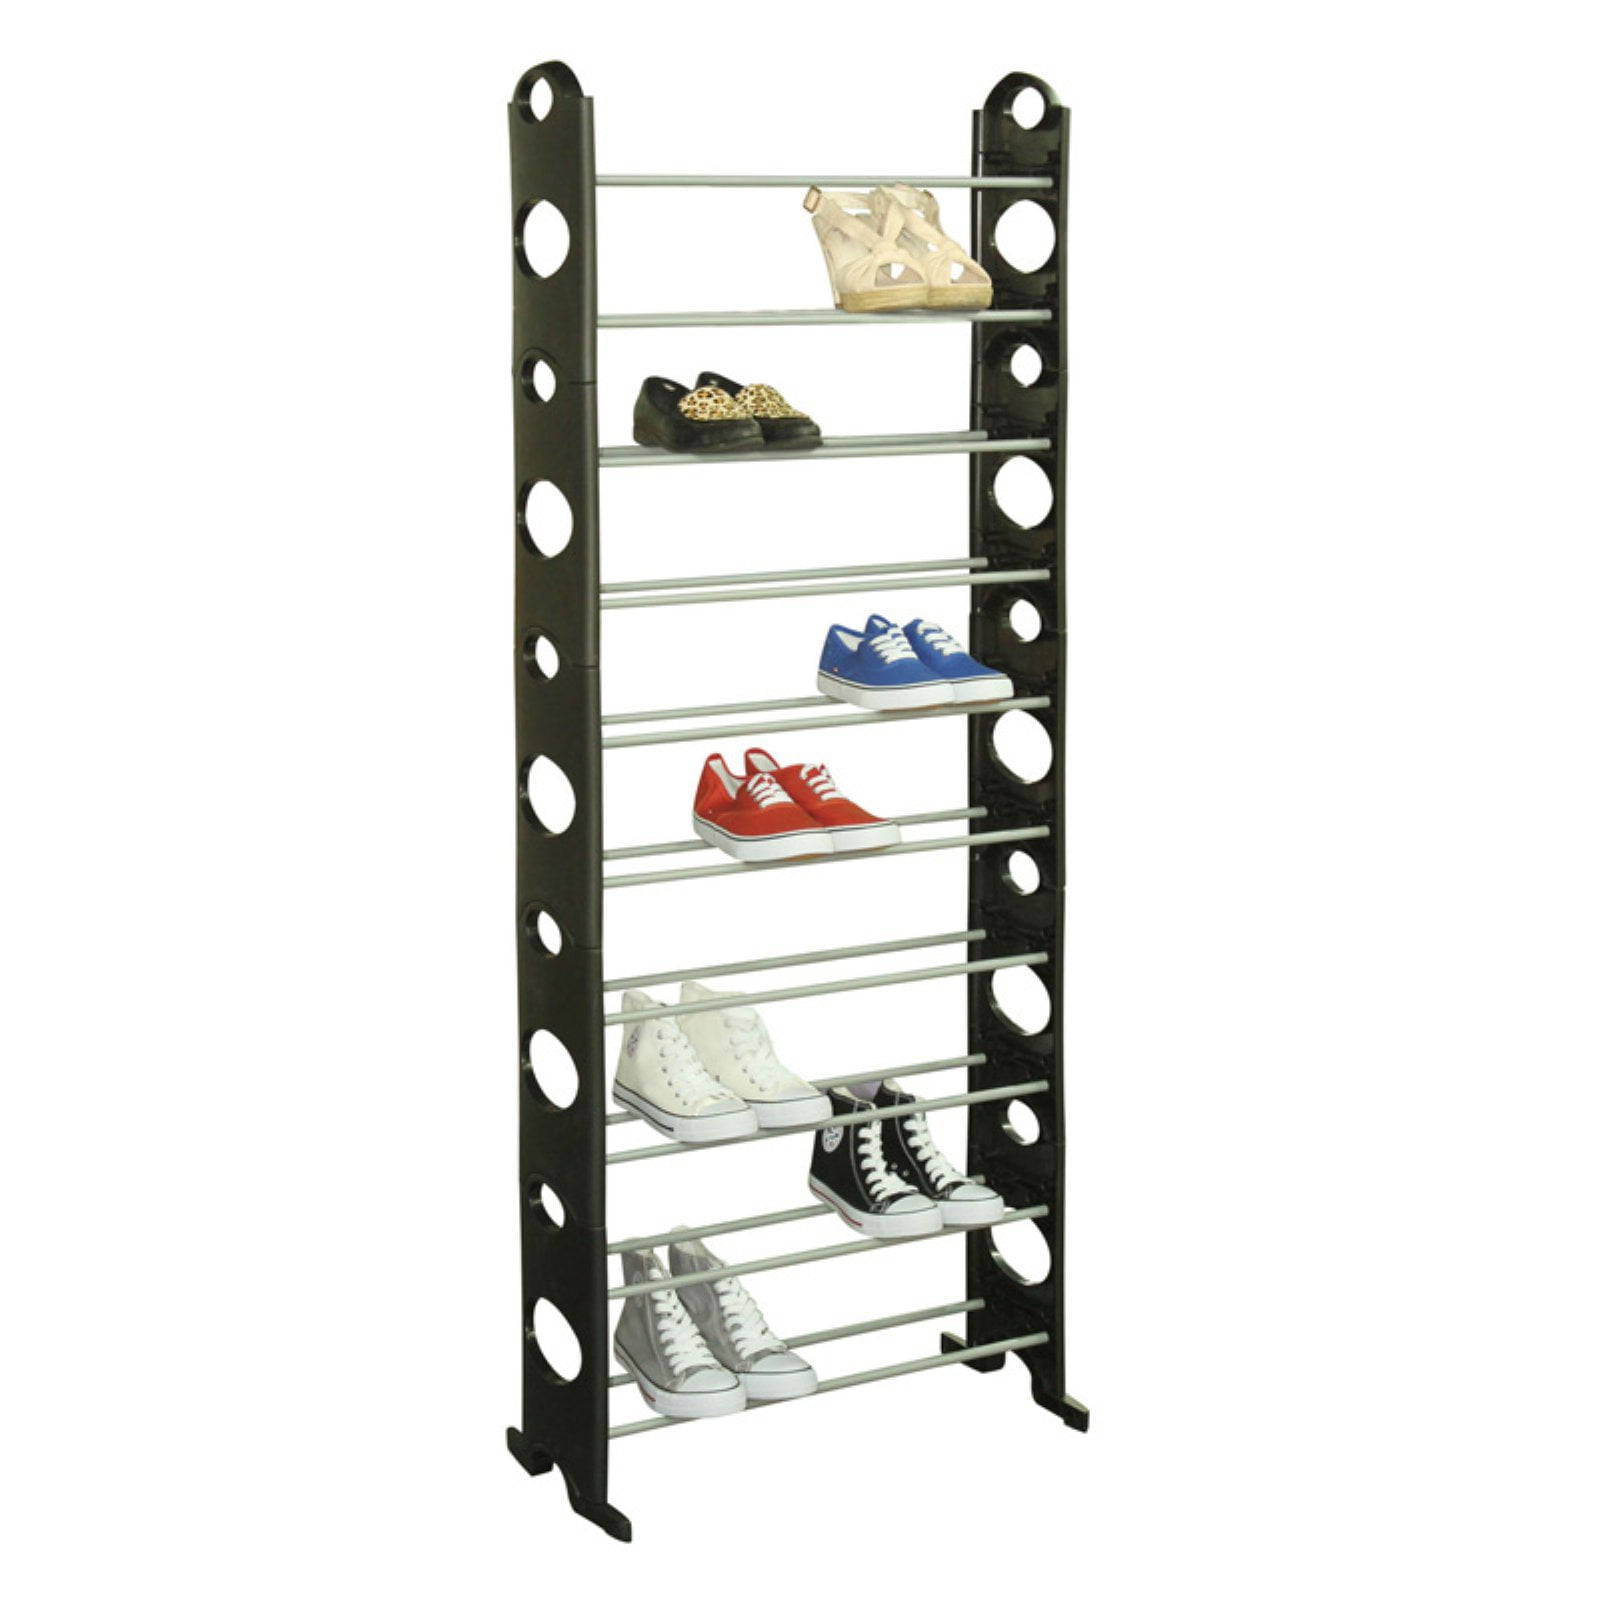 Somerset Home 5-Tier Shoe Rack 30 Pair Storage Organizer for Shoes, Size: 5 - Tier